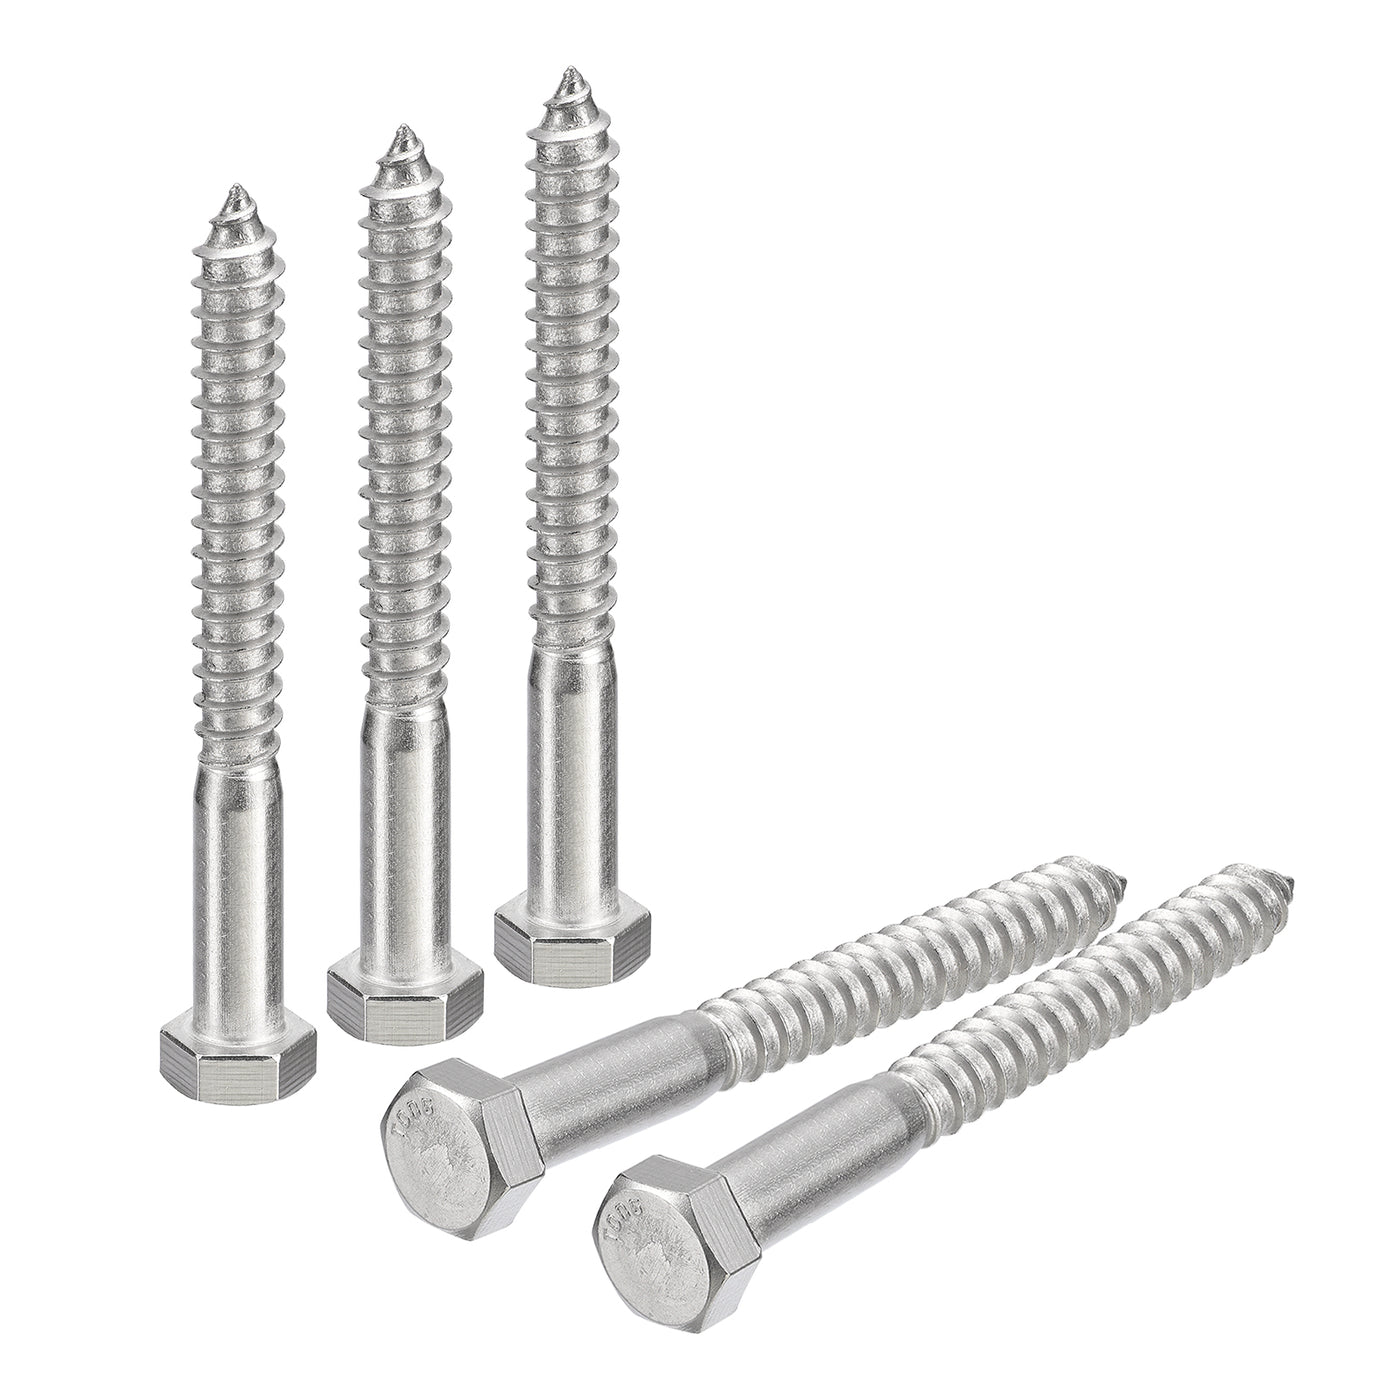 uxcell Uxcell Hex Head Lag Screws Bolts, 10pcs 1/2" x 5" 304 Stainless Steel Wood Screws